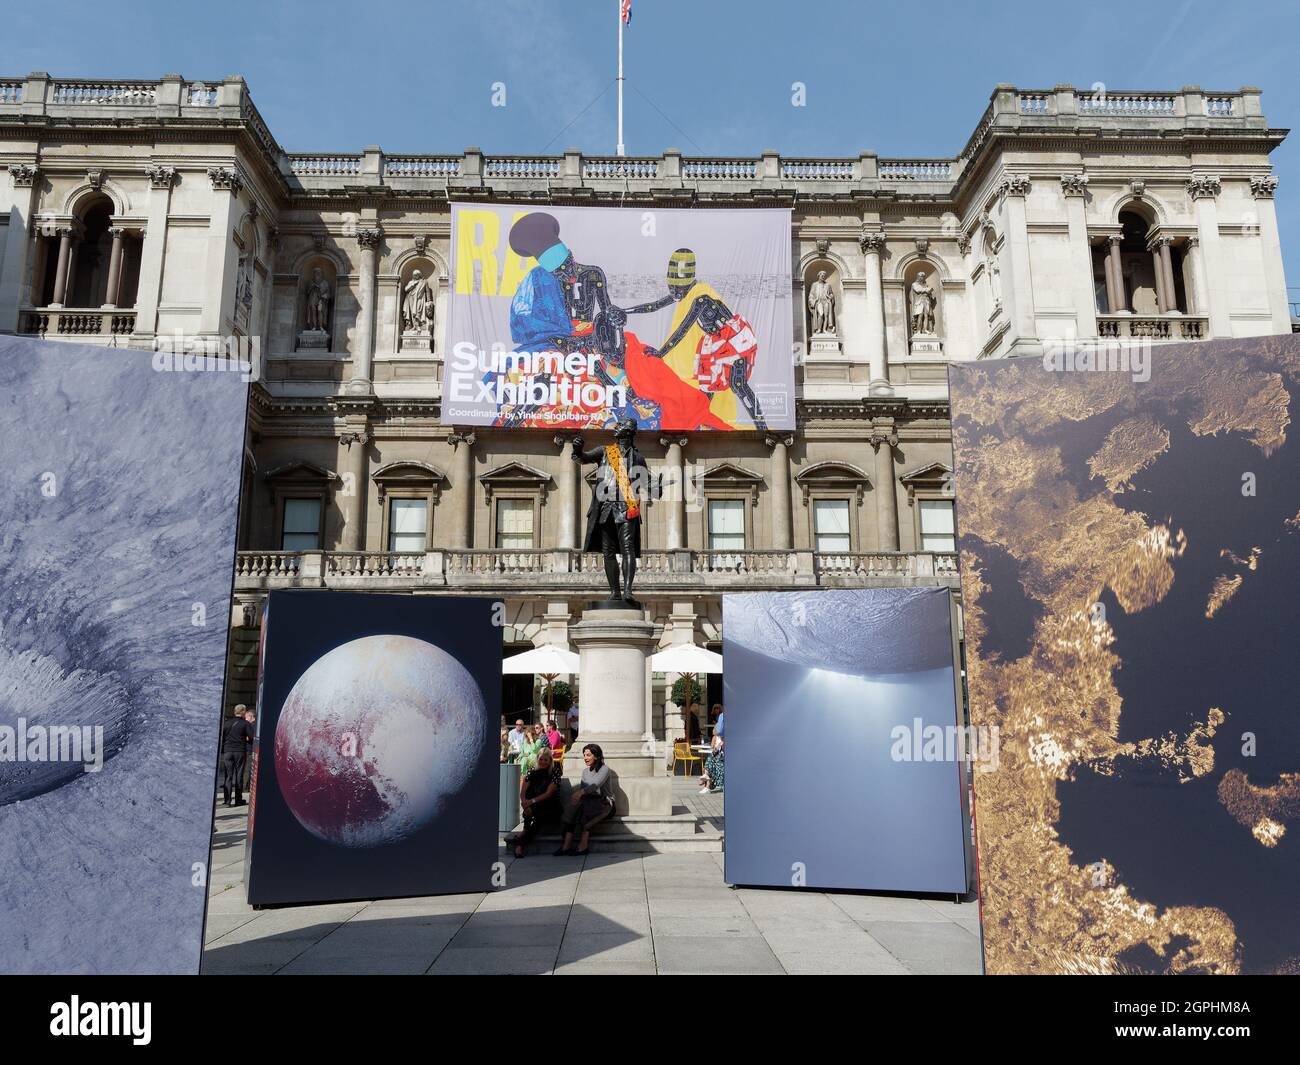 London, Greater London, England, September 21 2021: Art exhibition outside the Royal Academy of Arts in Burlington House on Piccadilly. Stock Photo